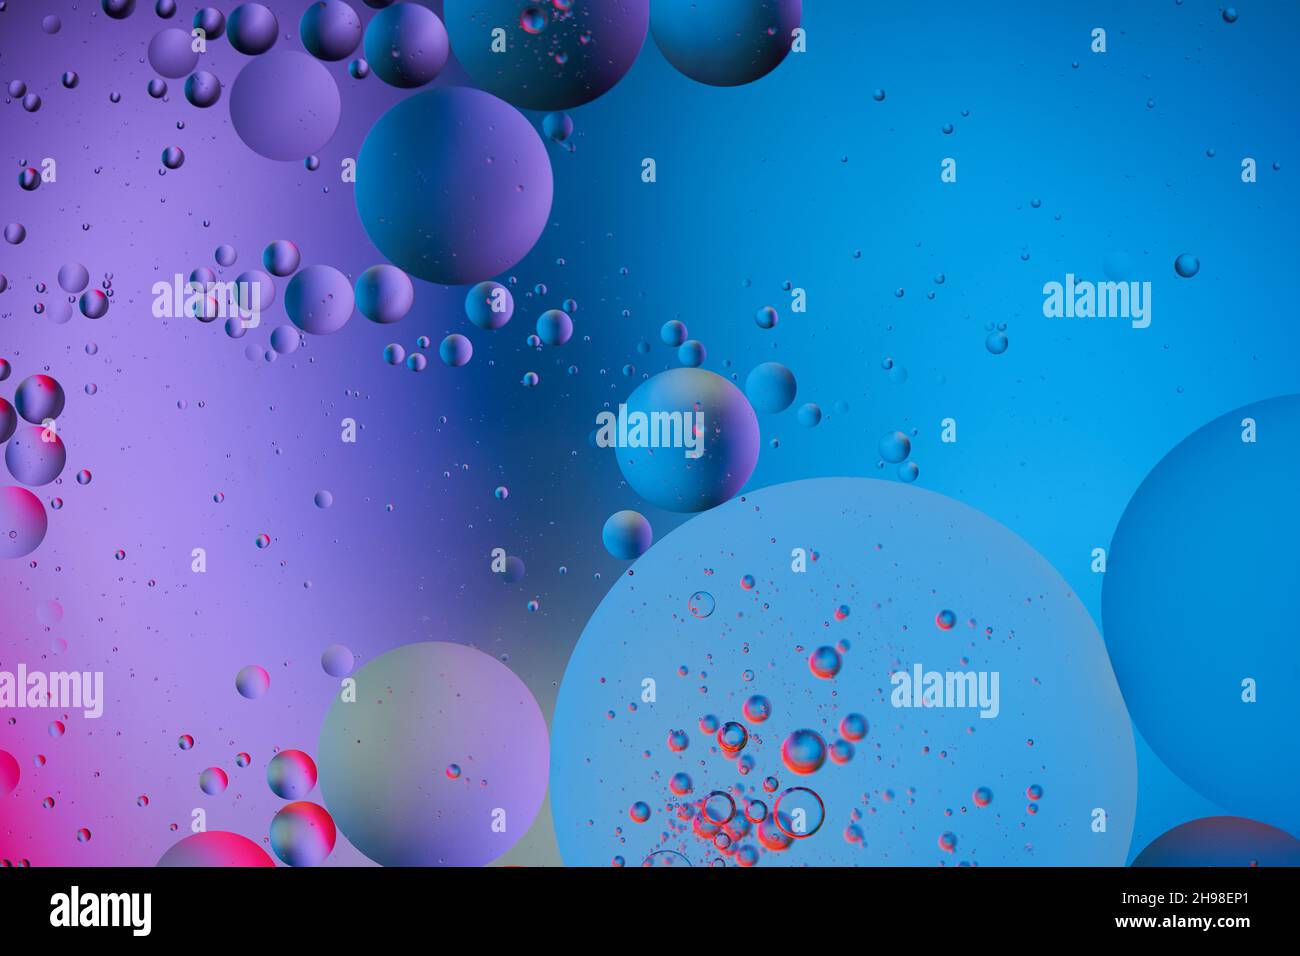 Abstract colorful Background, purple Bubbles and circles in oily Water. Blue and pink colors. Macro photography. Top view. Stock Photo